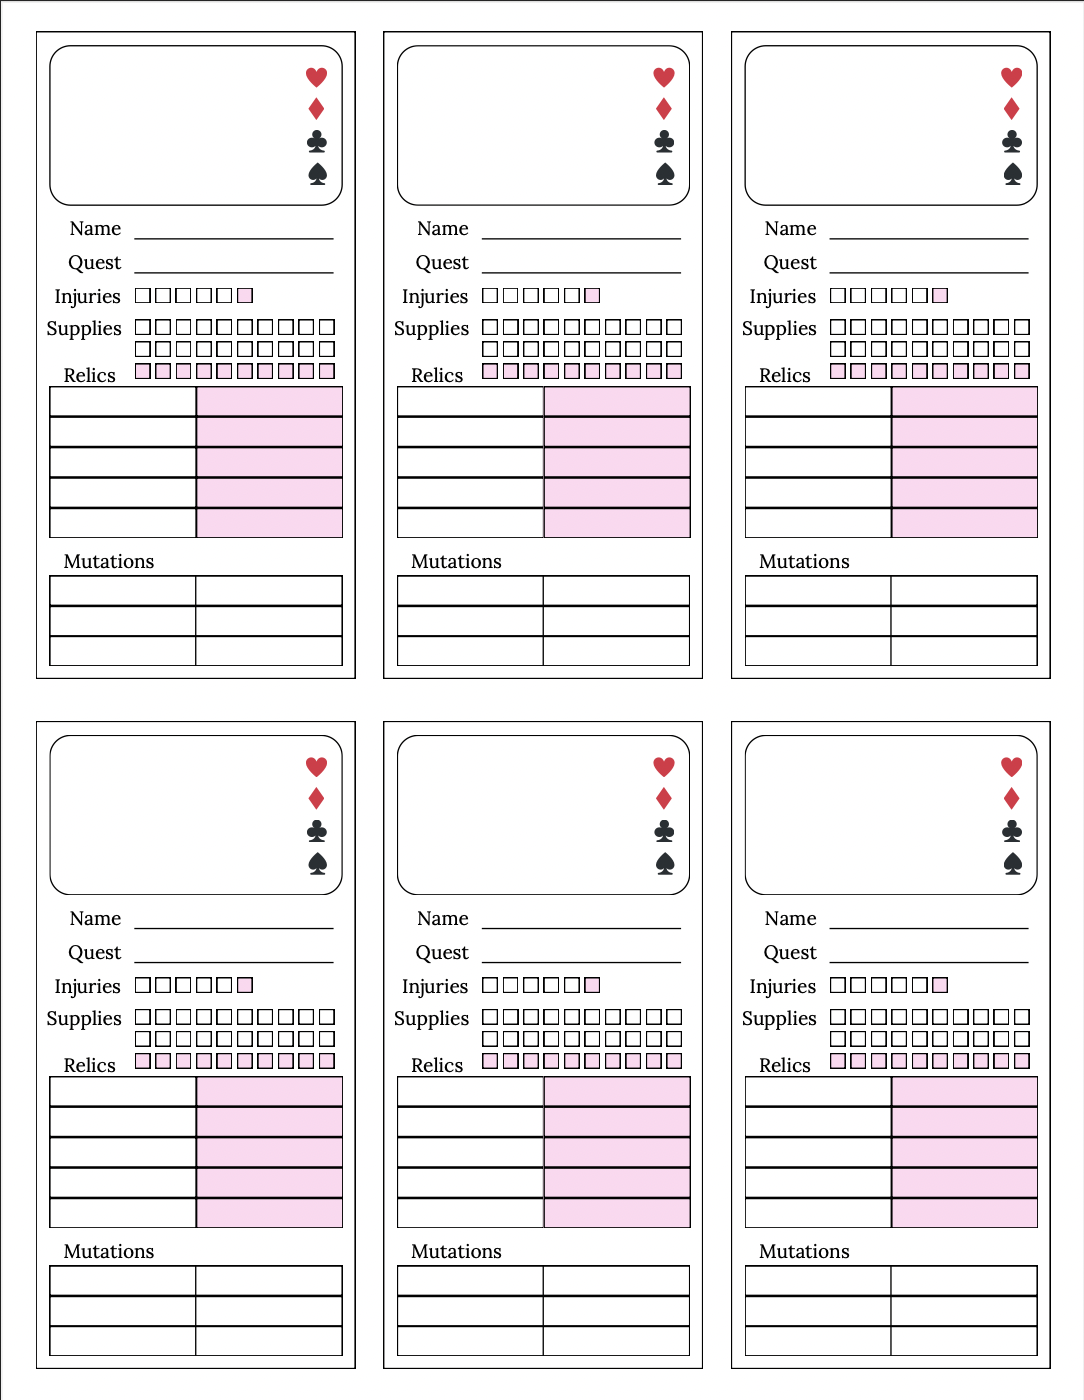 Supplemental page including 6 character sheets